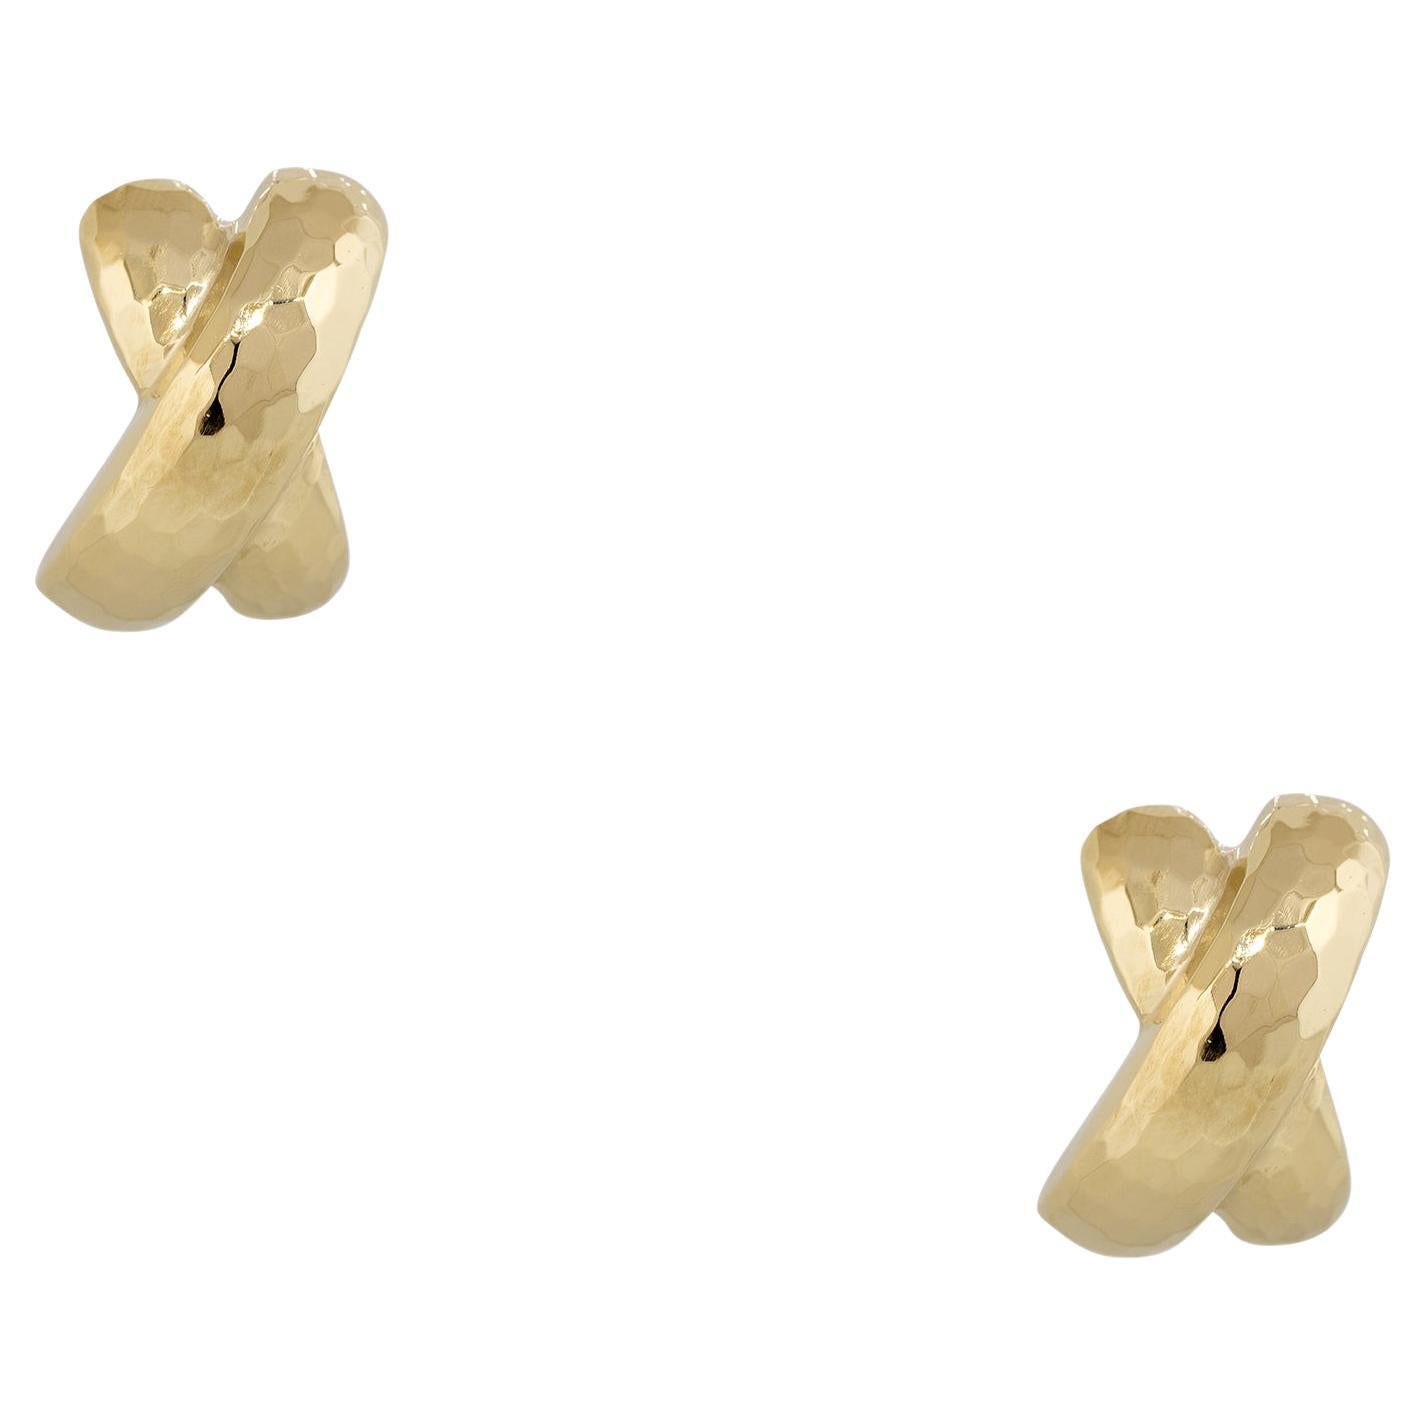 Large Solid Hammered "X" Earrings 14 Karat In Stock For Sale